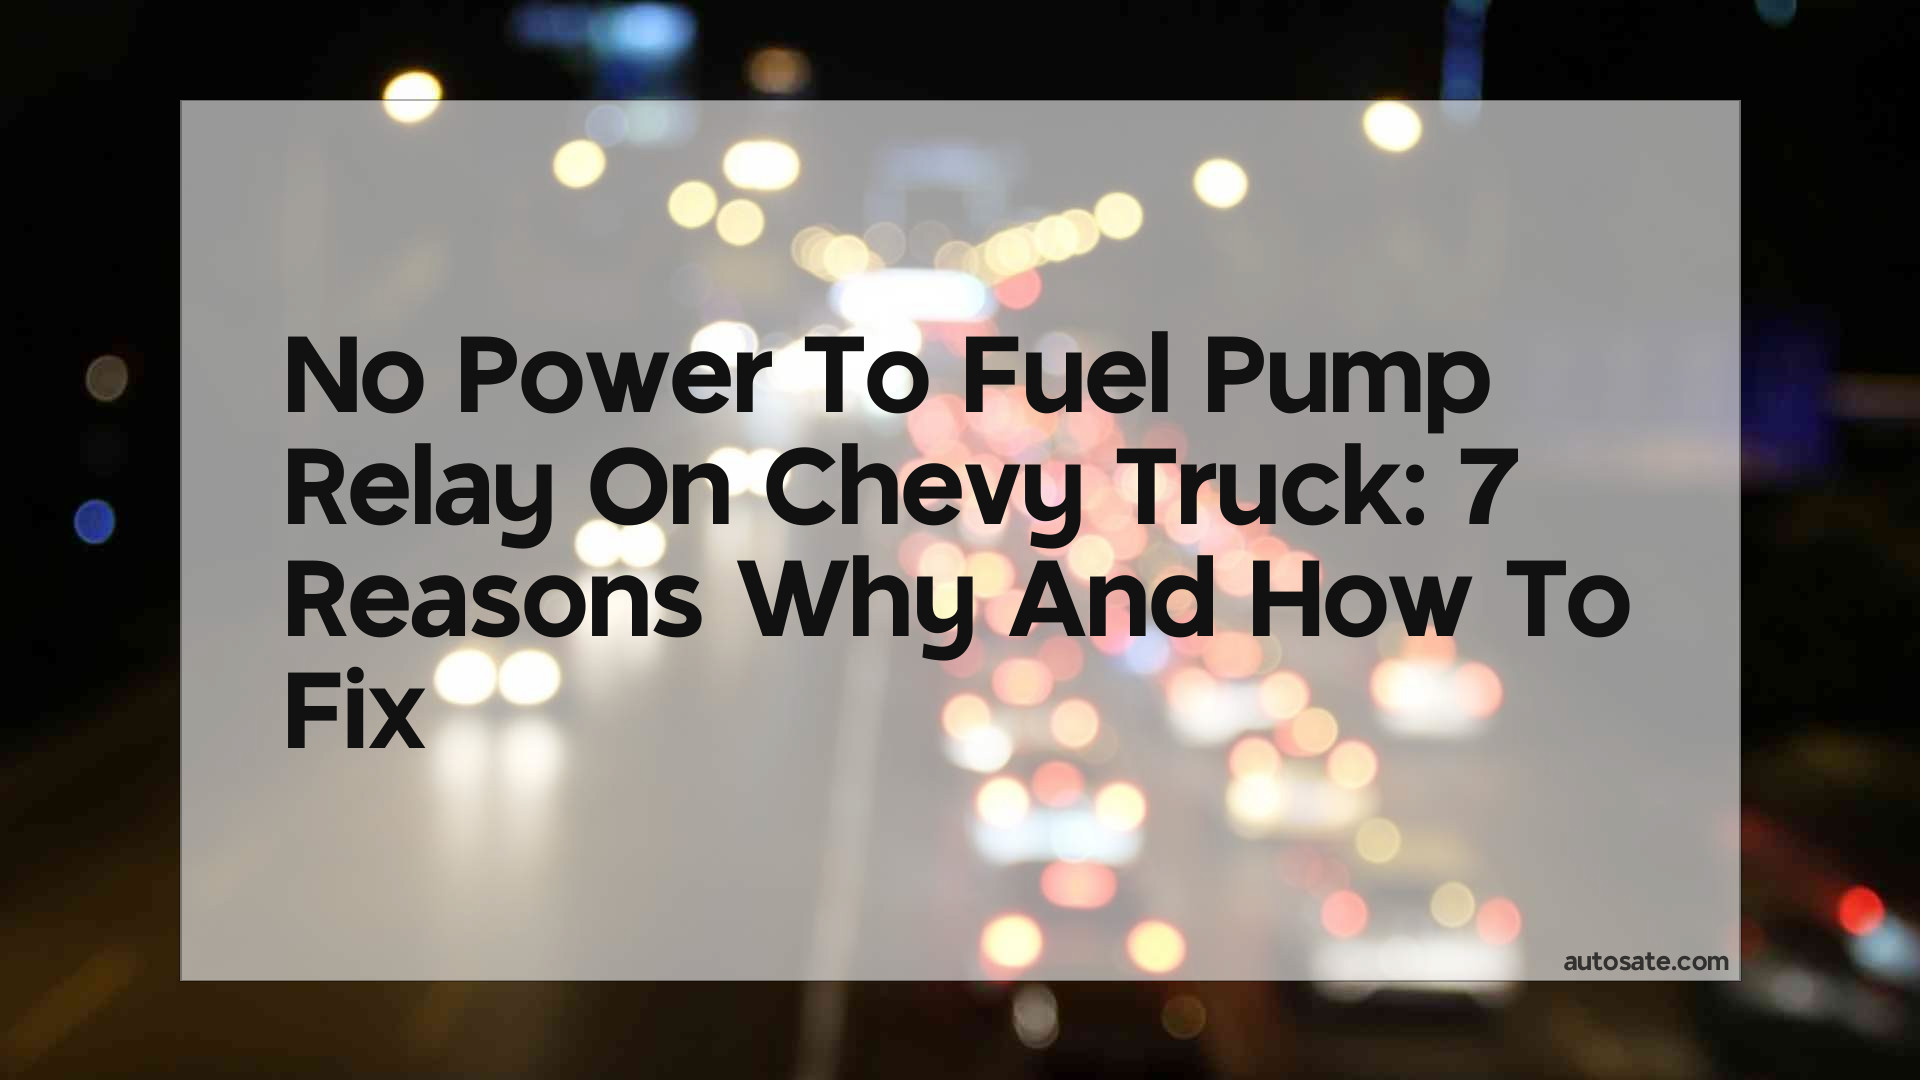 No Power To Fuel Pump Relay On Chevy Truck: 7 Reasons Why And How To Fix